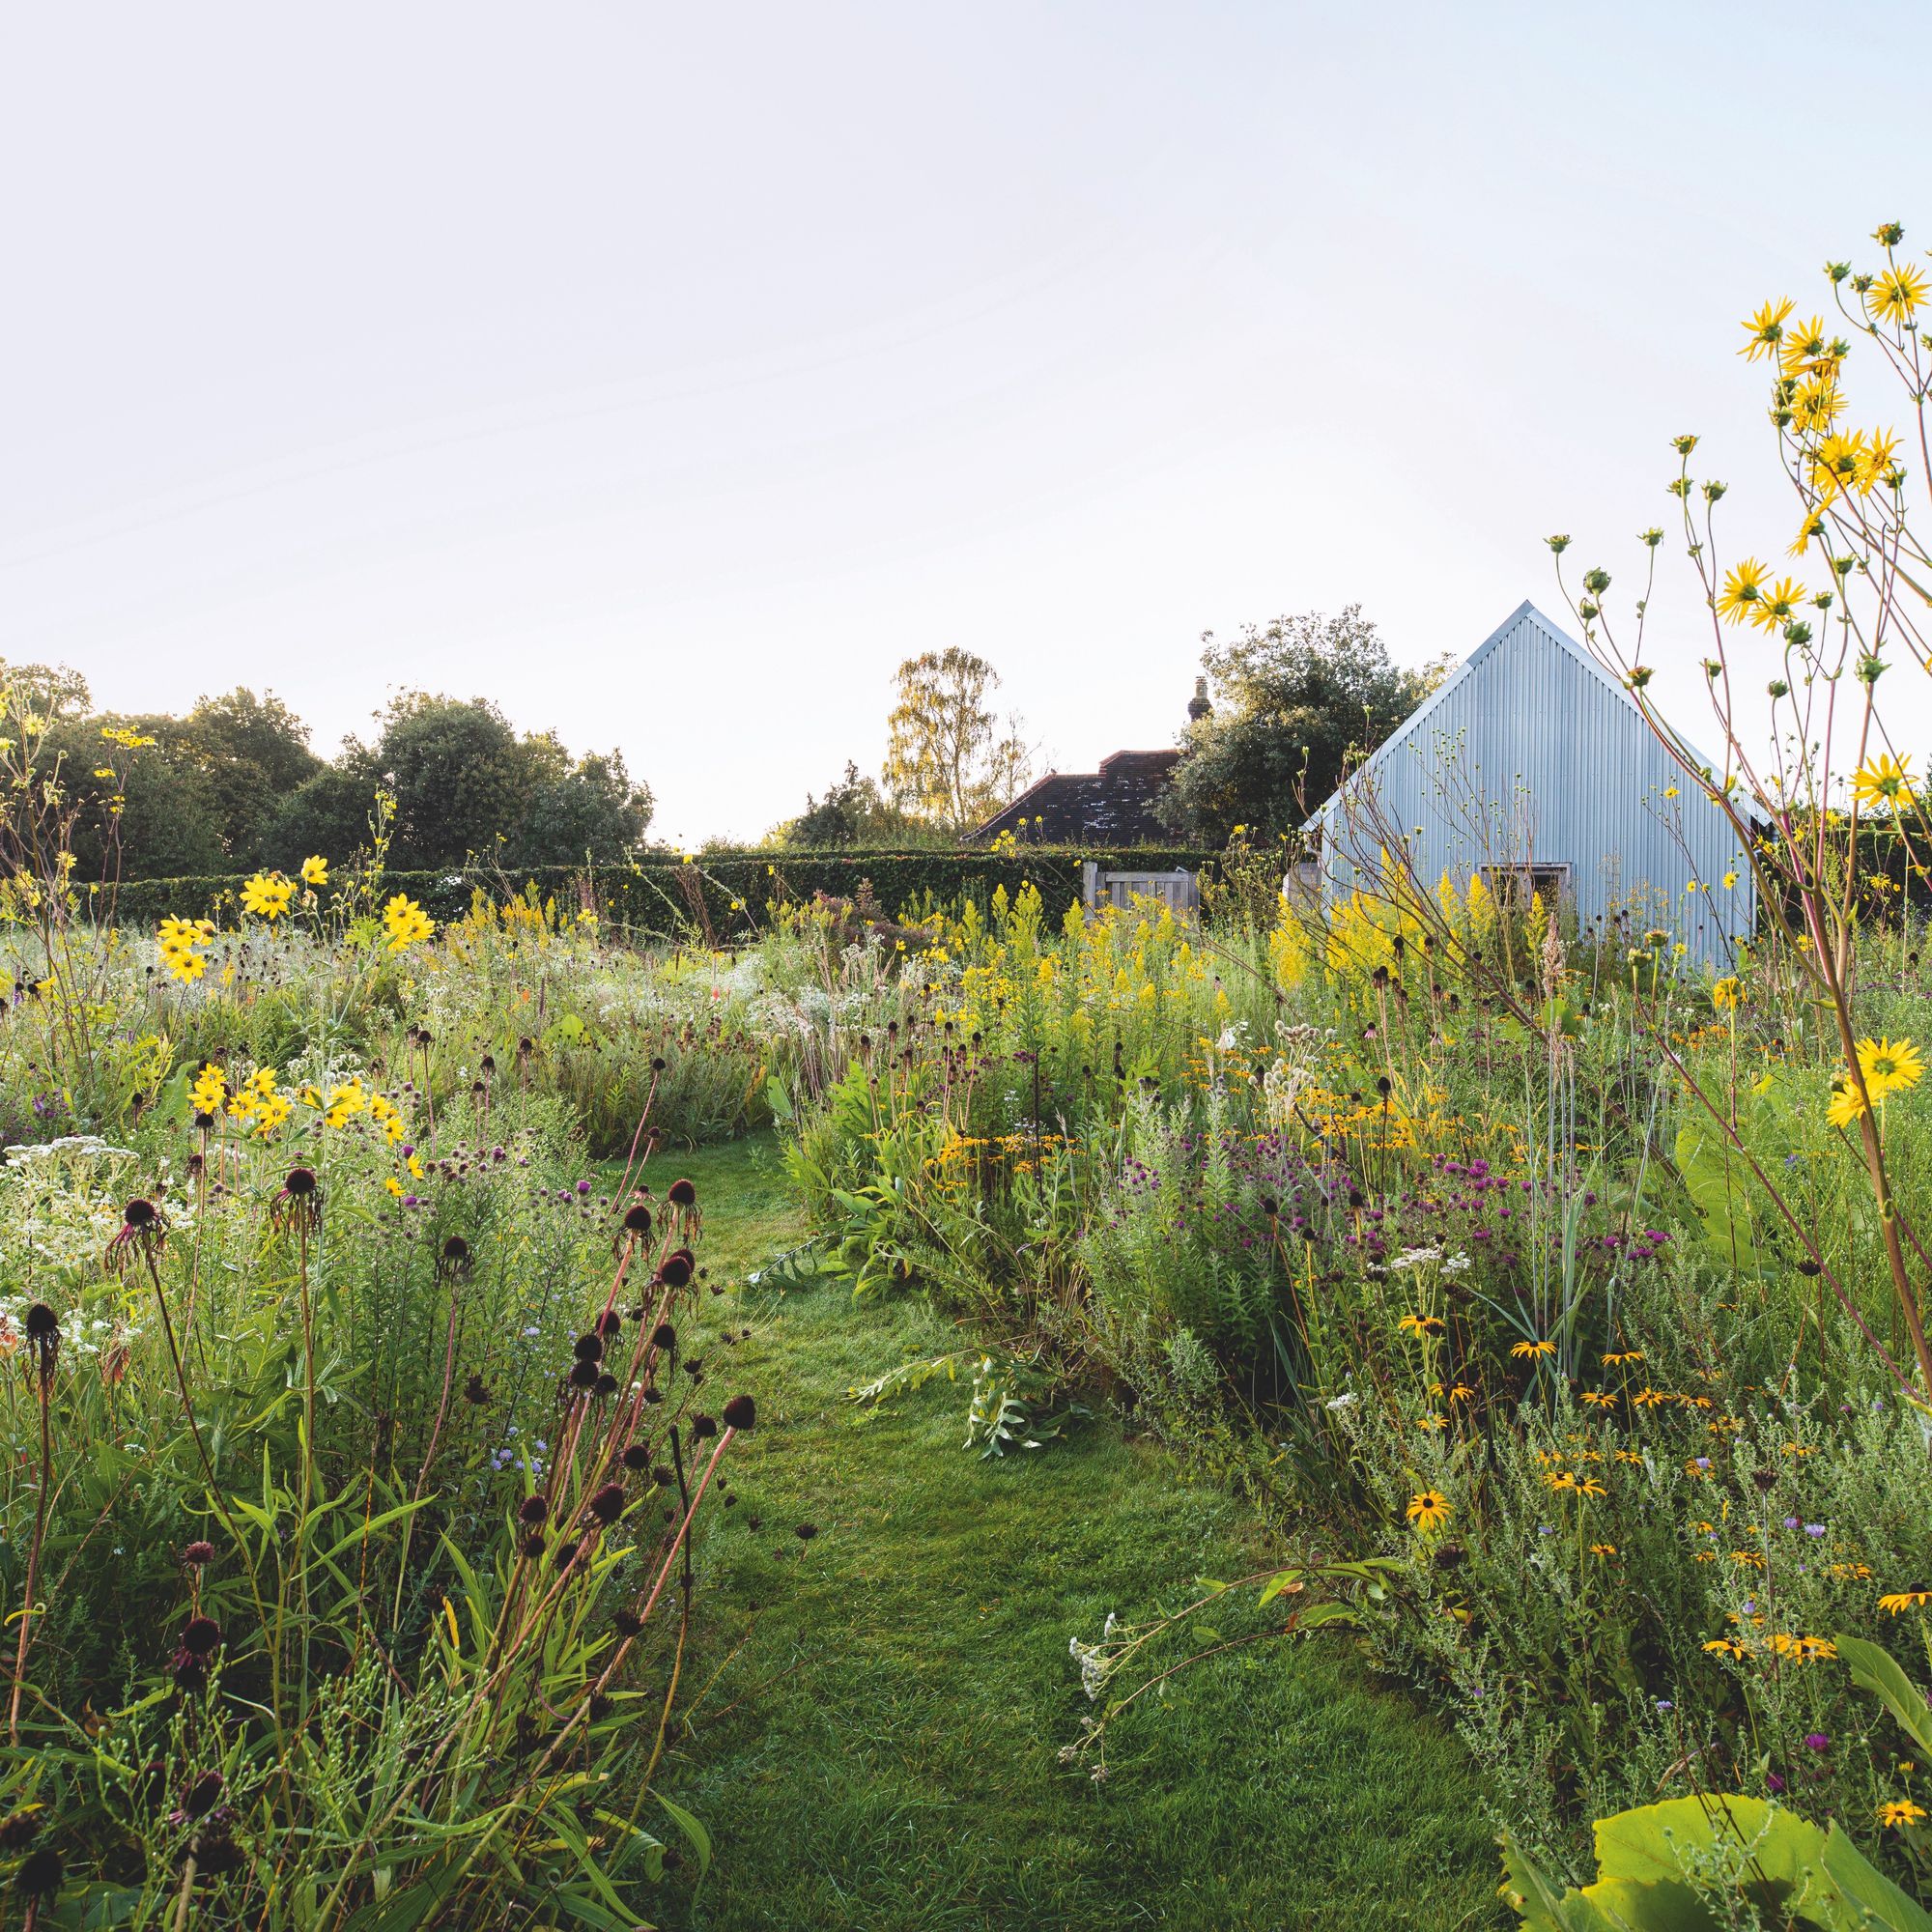 Ways to Add Wildness to Your Garden - Review of WILD by Noel Kingsbury